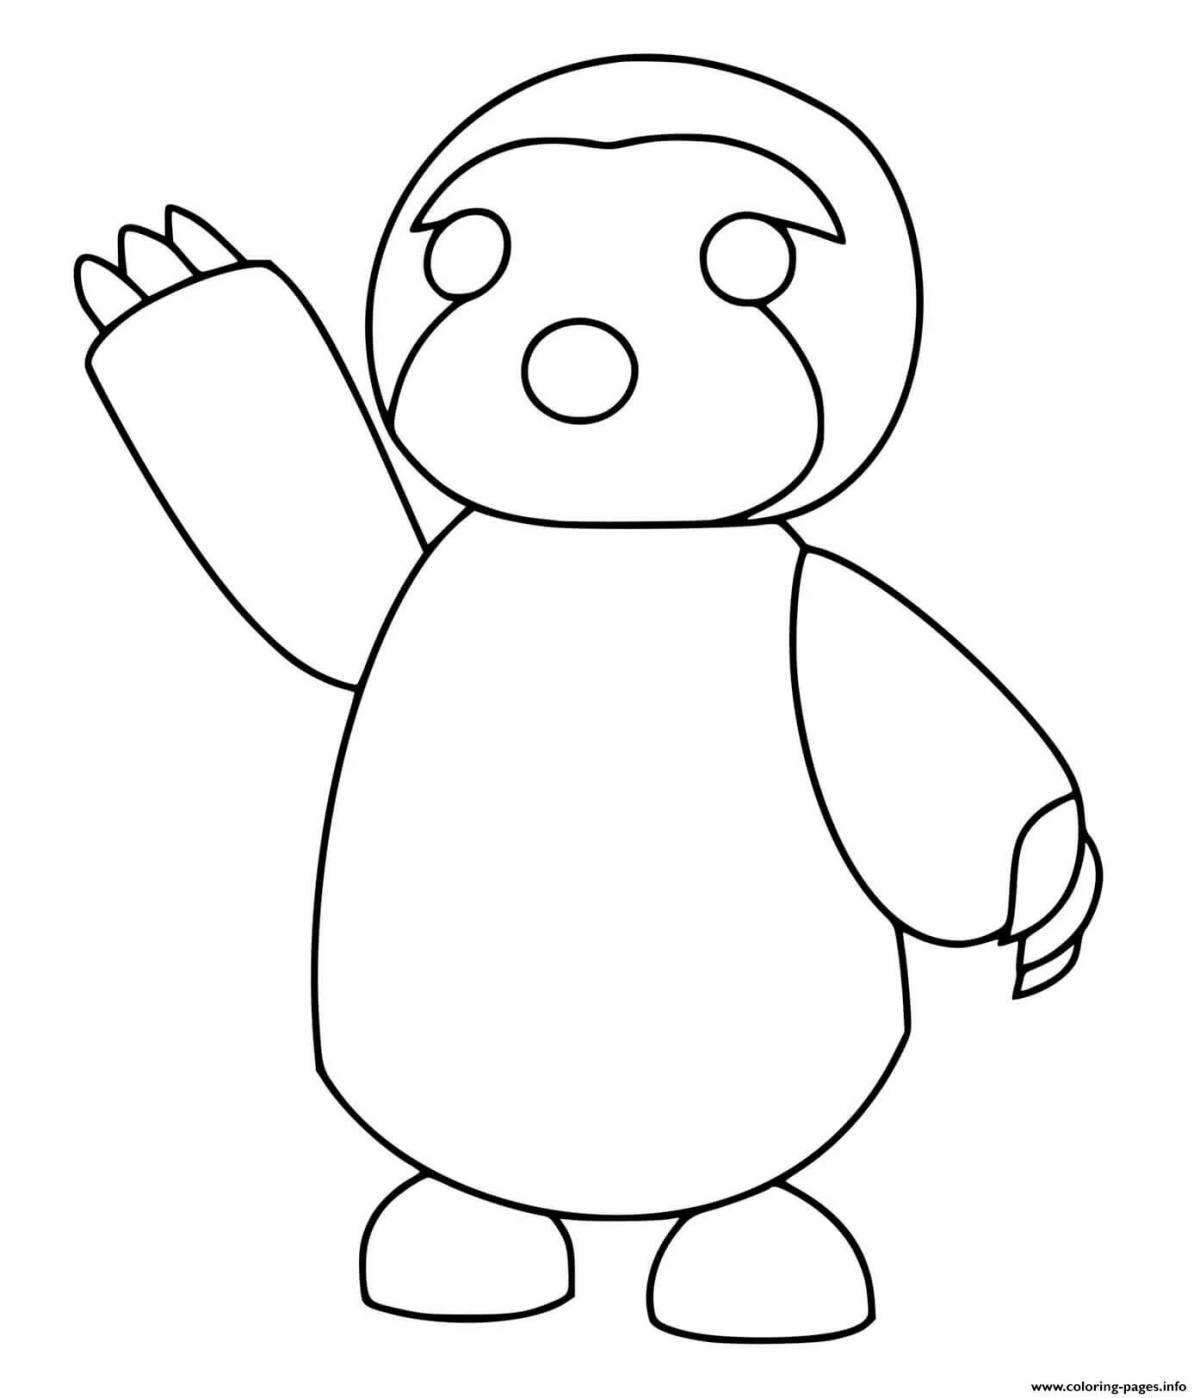 Adorable roblox adopt me pets coloring page